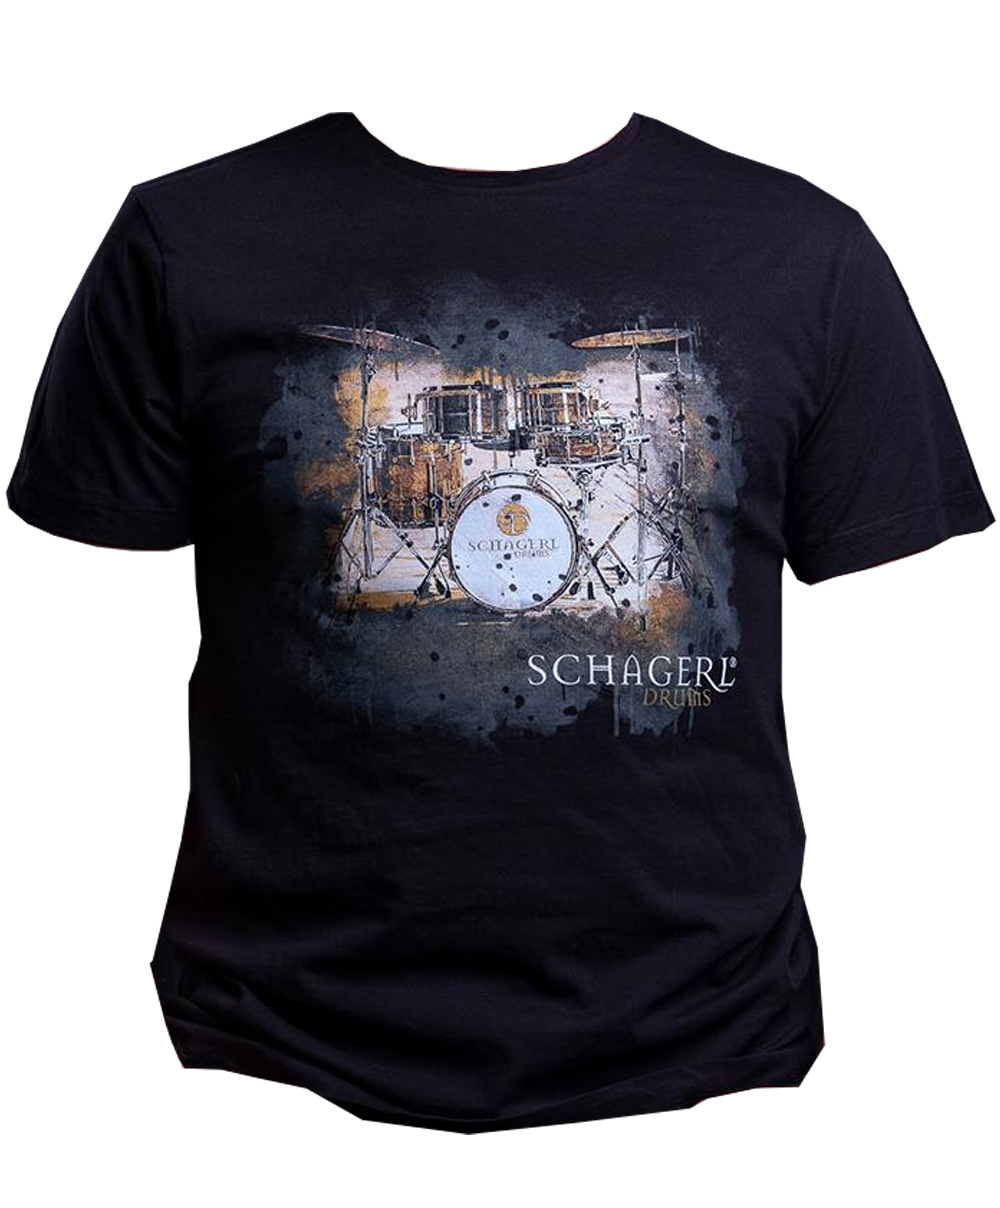 Schagerl Drums T-Shirt gold/black 2019 - LARGE